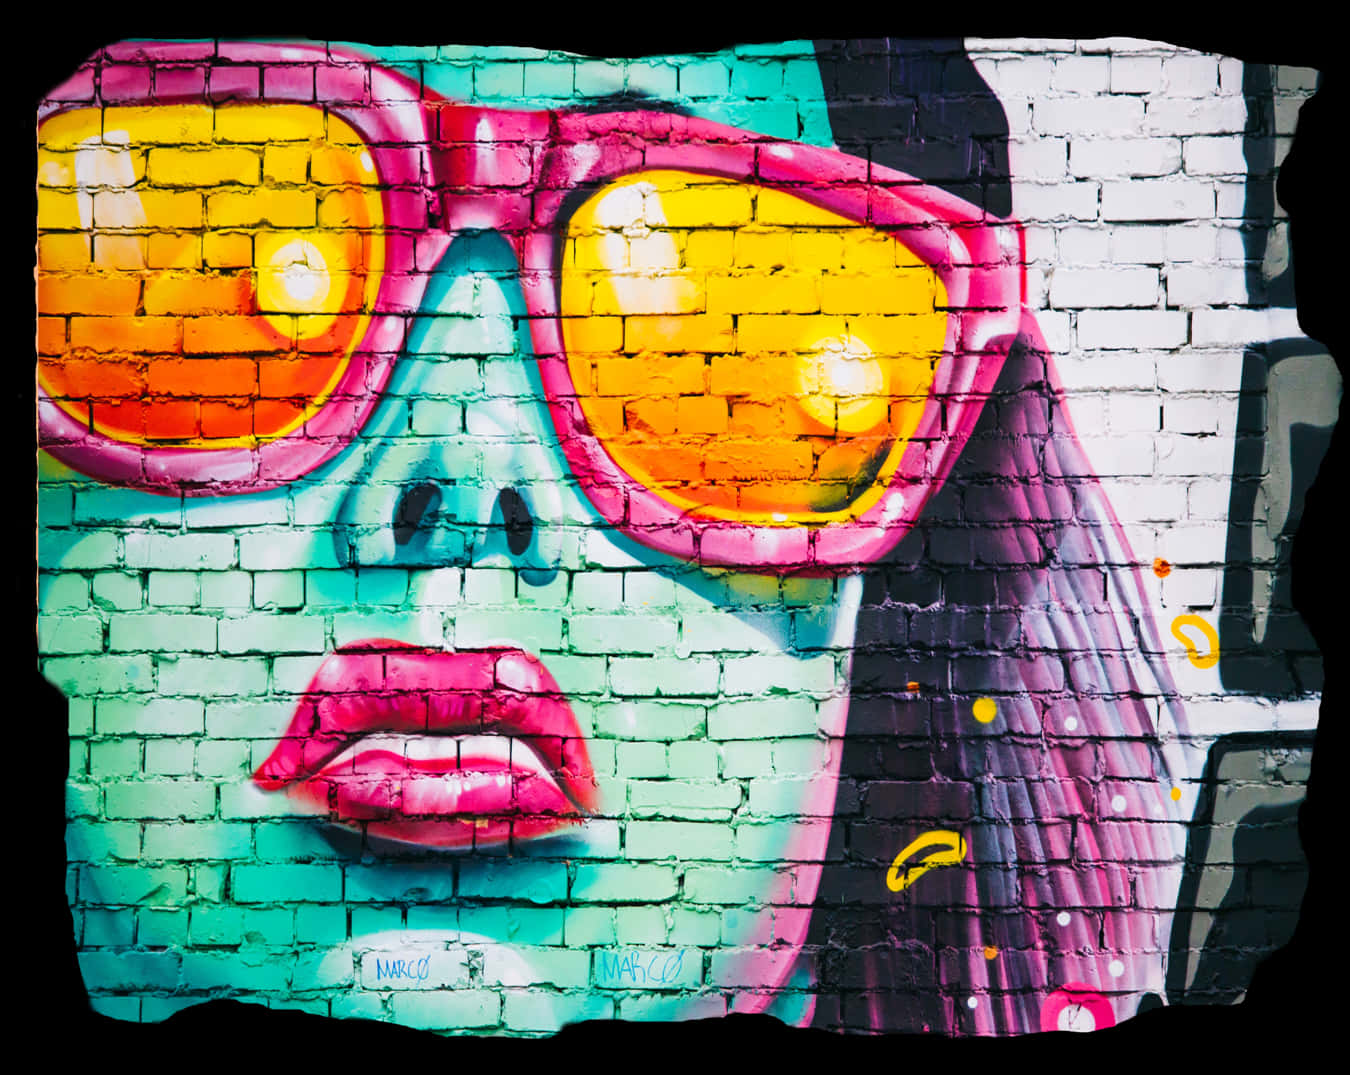 A Mural Of A Woman Wearing Sunglasses